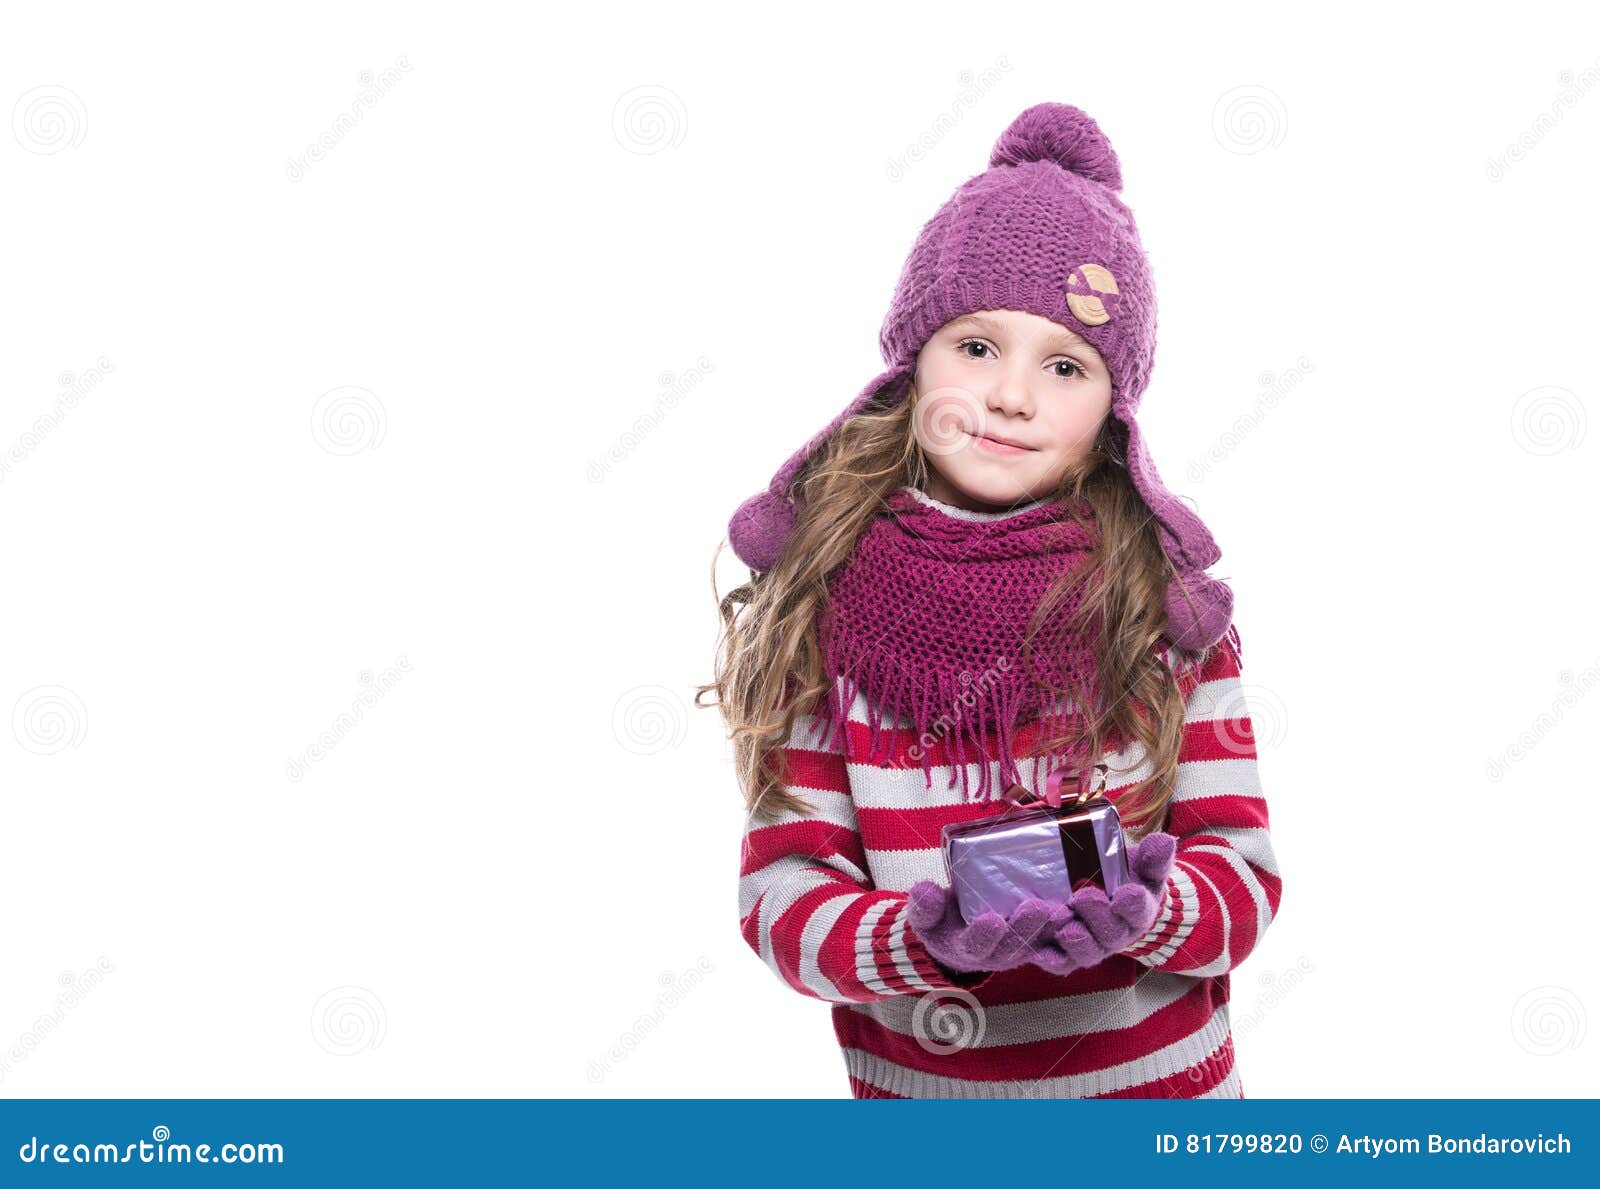 Cute Smiling Little Girl Wearing Purple Knitted Scarf, Hat and Gloves ...